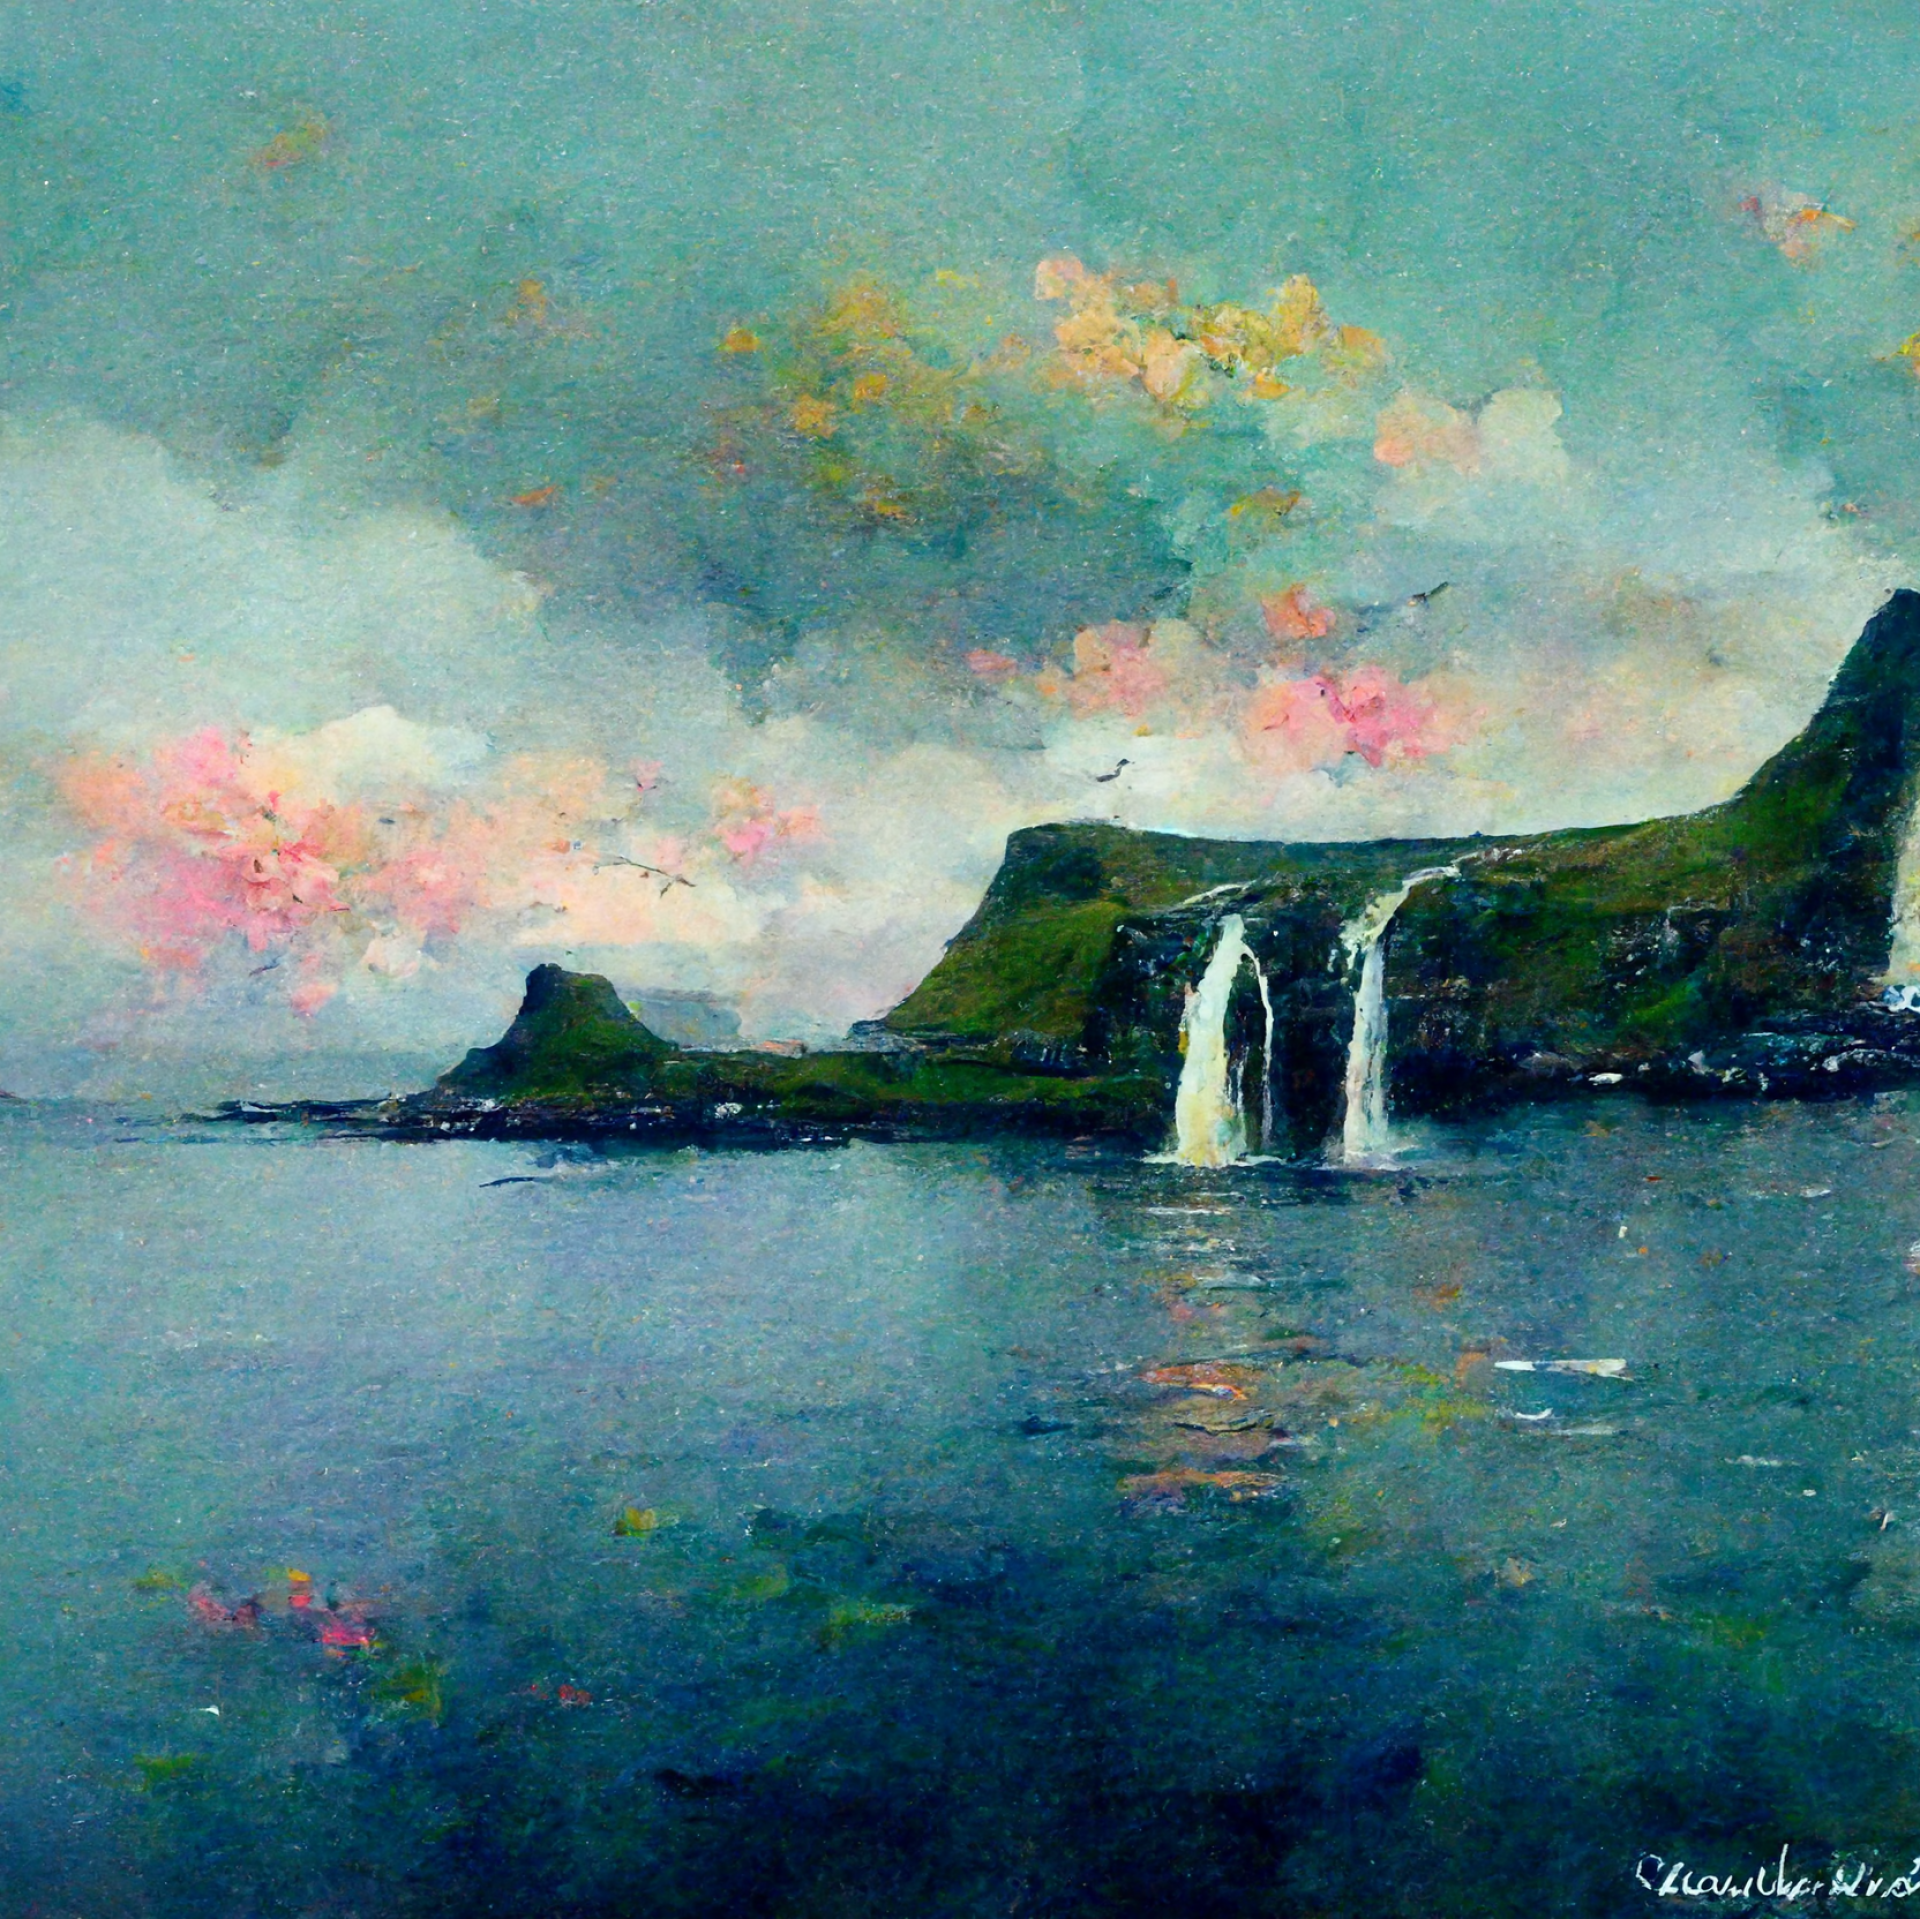 AI-generated image from Midjourney, the Faroe Islands inspired by Monet.